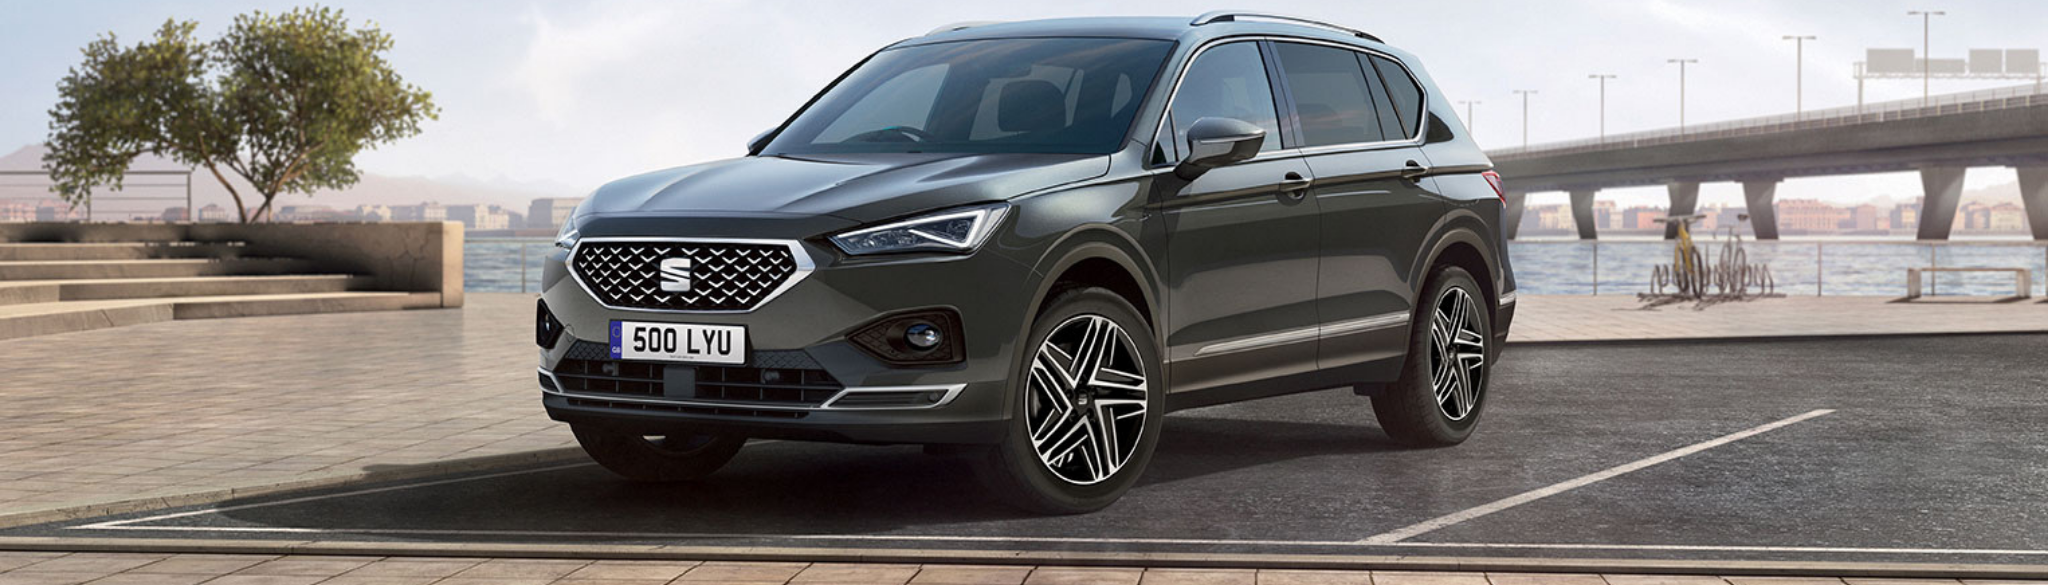 SEAT Tarraco parked in a carpark